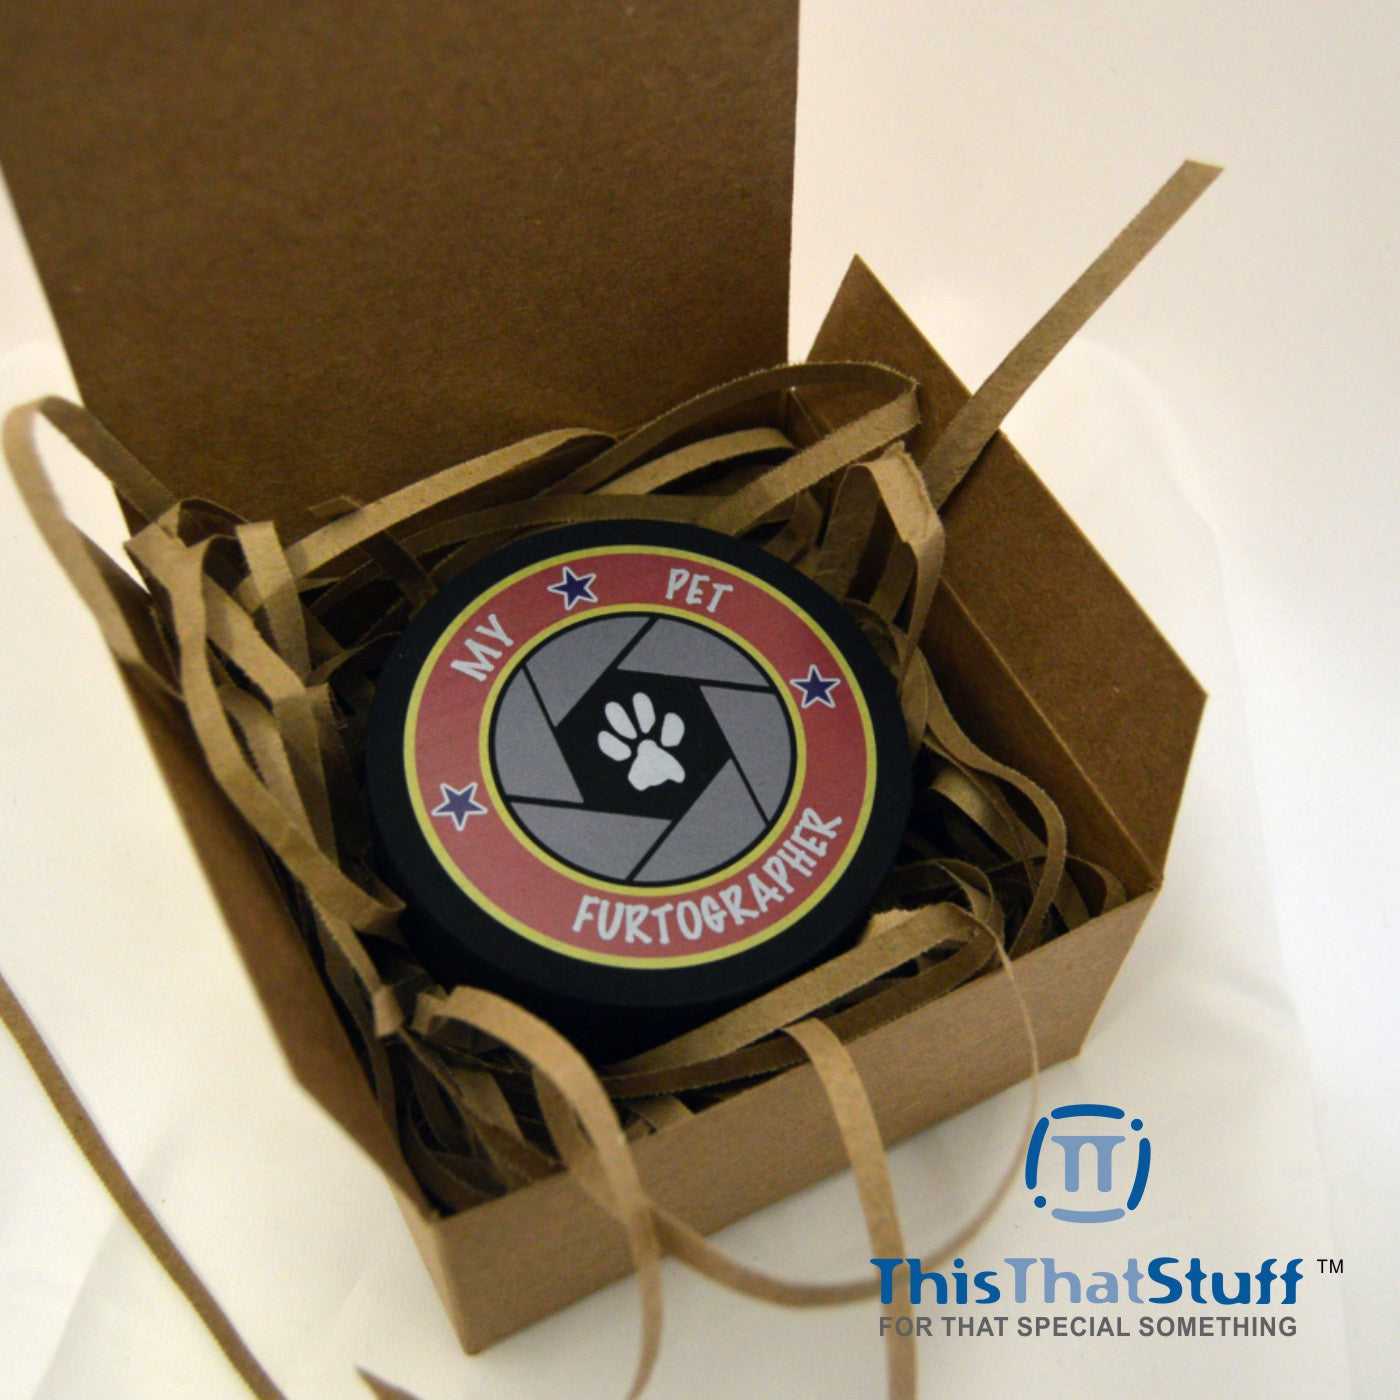 Corporate Custom Designed Hockey Puck | Printed on an Official Weight and Size Regulated Puck